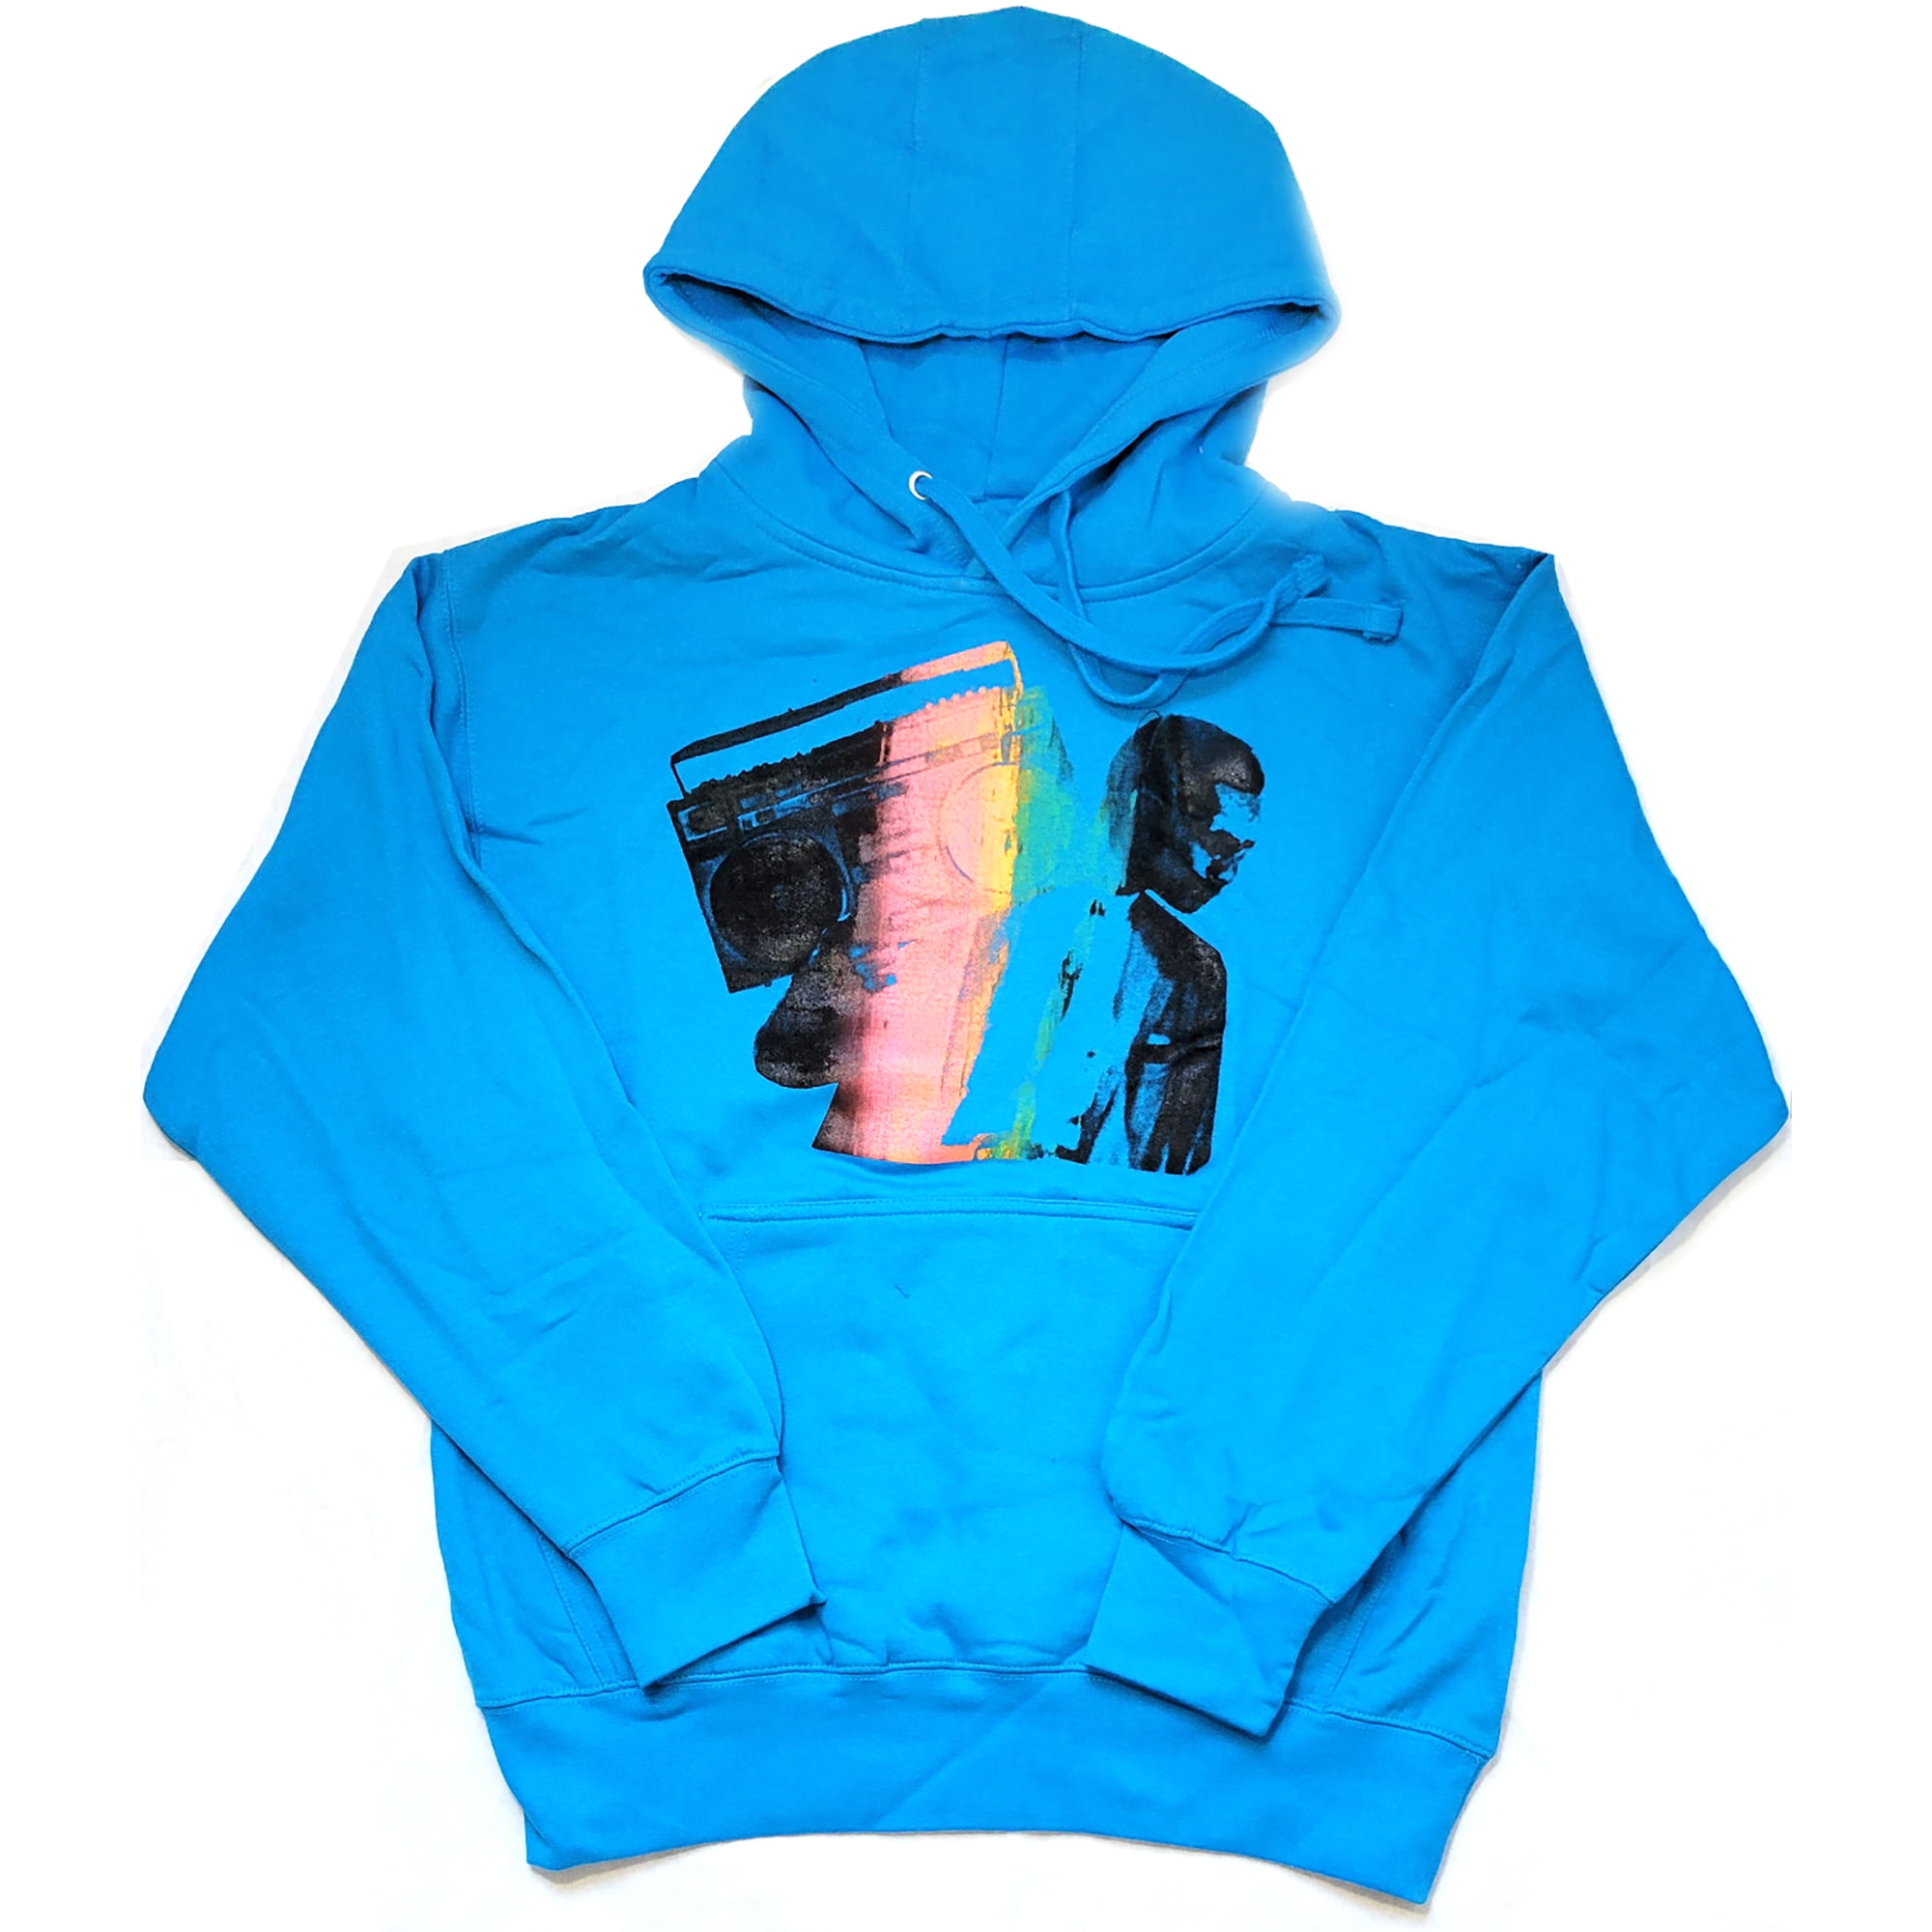 Glass House Apparel Malcolm x Hip Hop Radio Hoodie, Adult Unisex, Size: Large, Blue